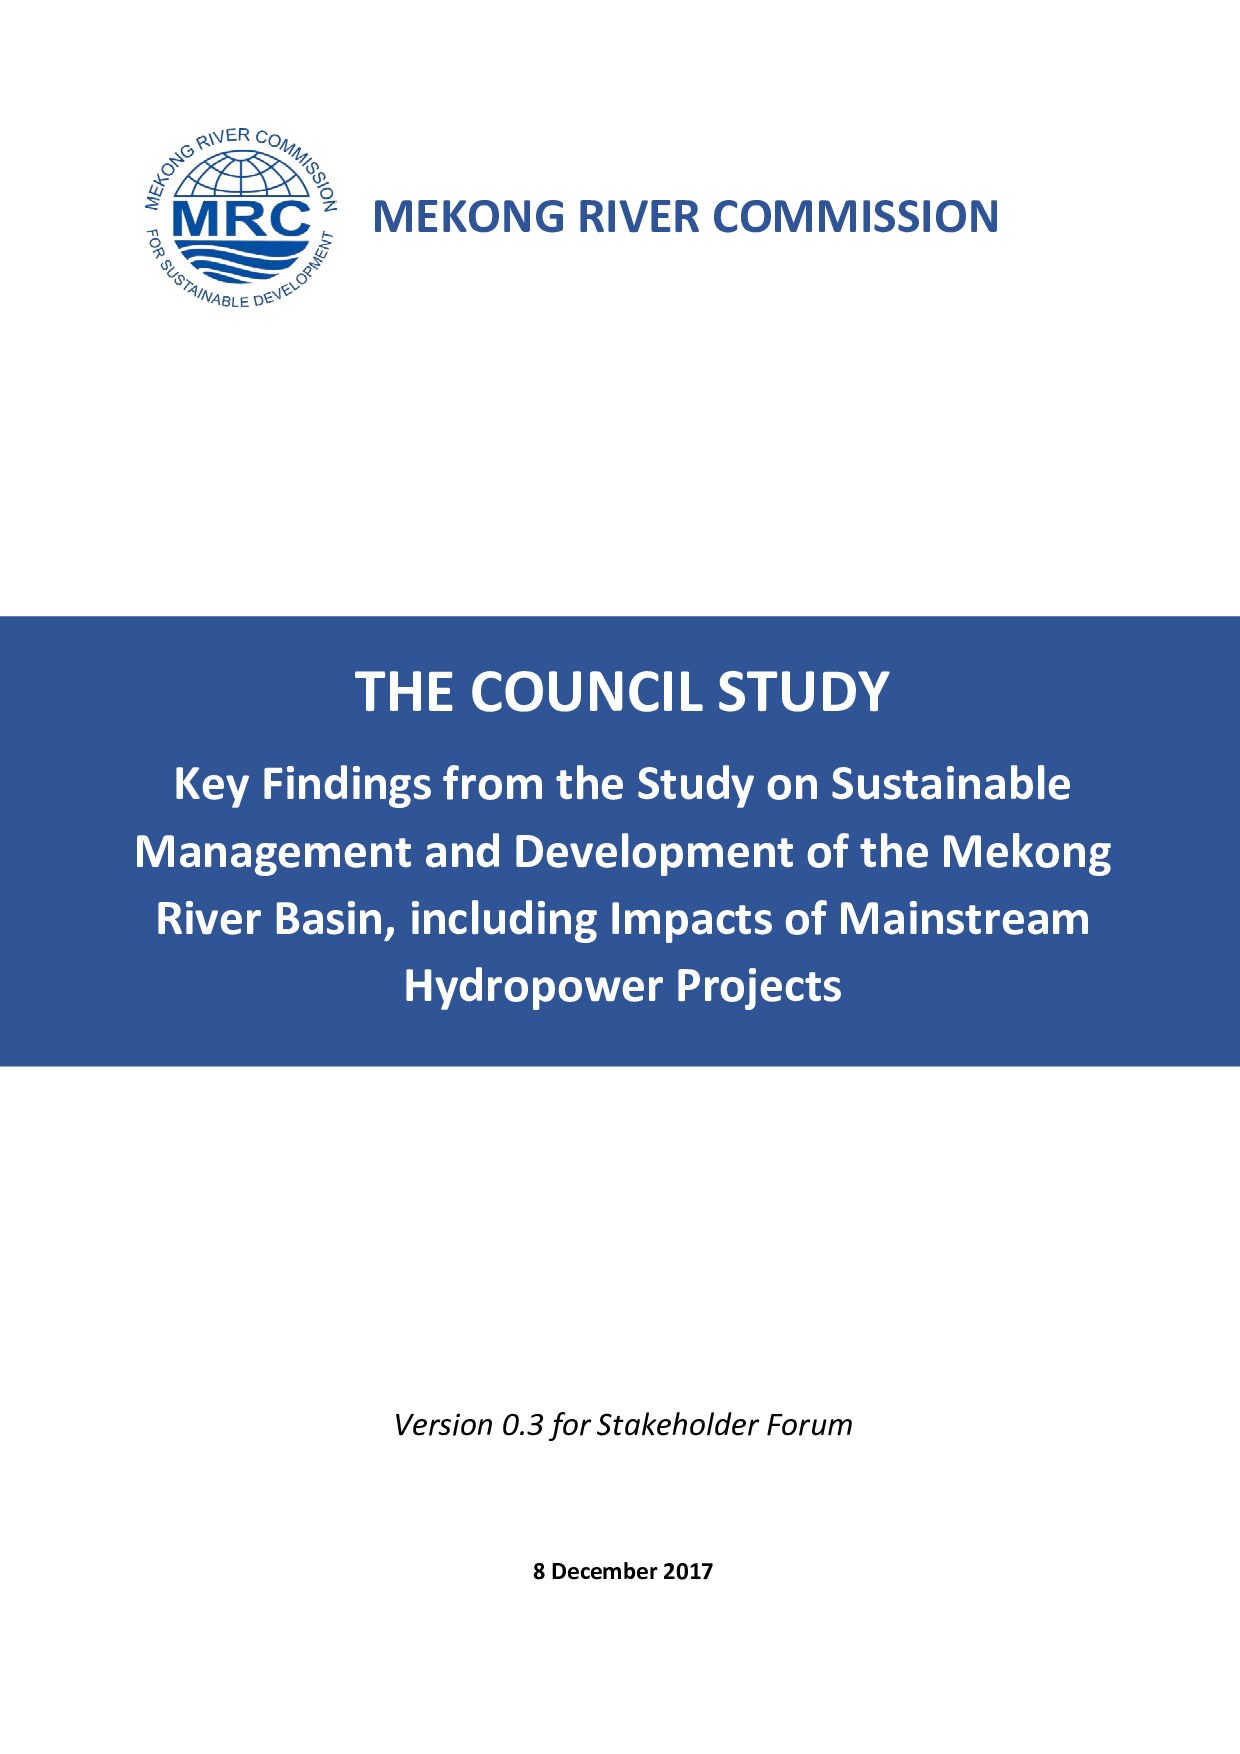 THE COUNCIL STUDY Key Findings from the Study on Sustainable Management and Development of the Mekong River Basin, including Impacts of Mainstream Hydropower Project